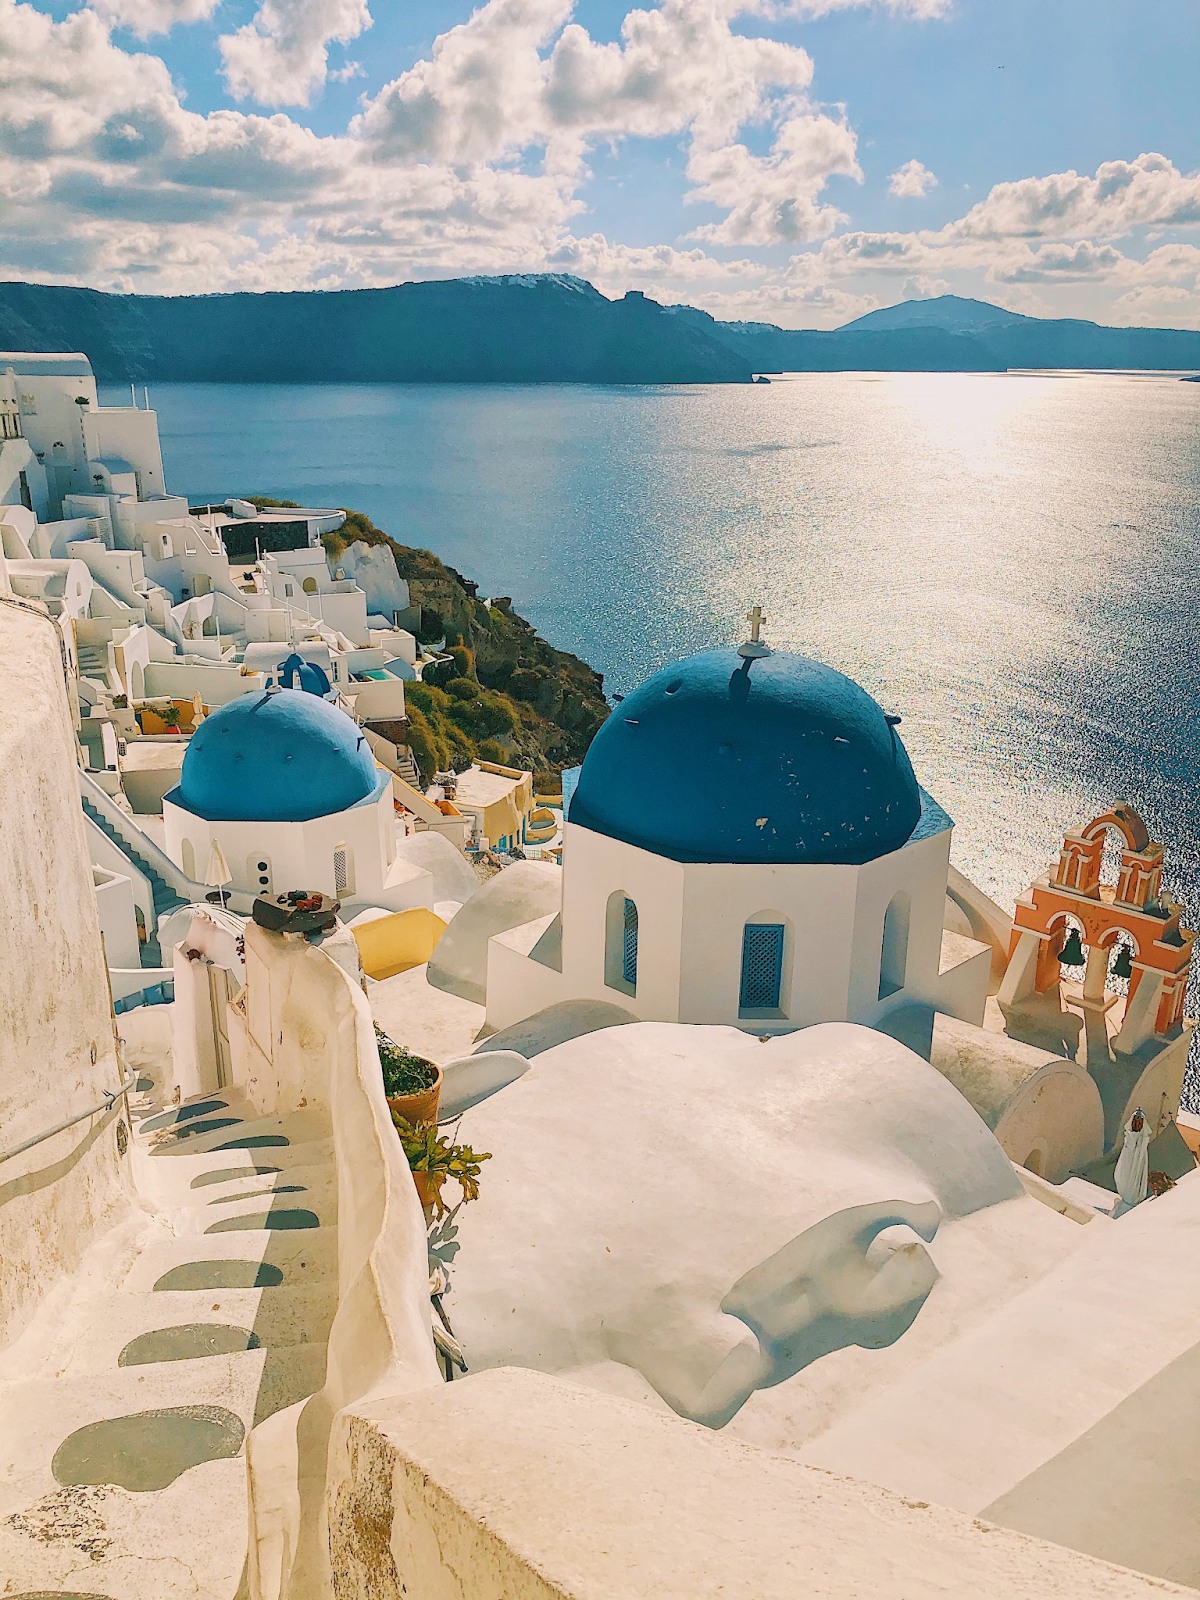 A view of white and blue buildings near the sea in Santorini.